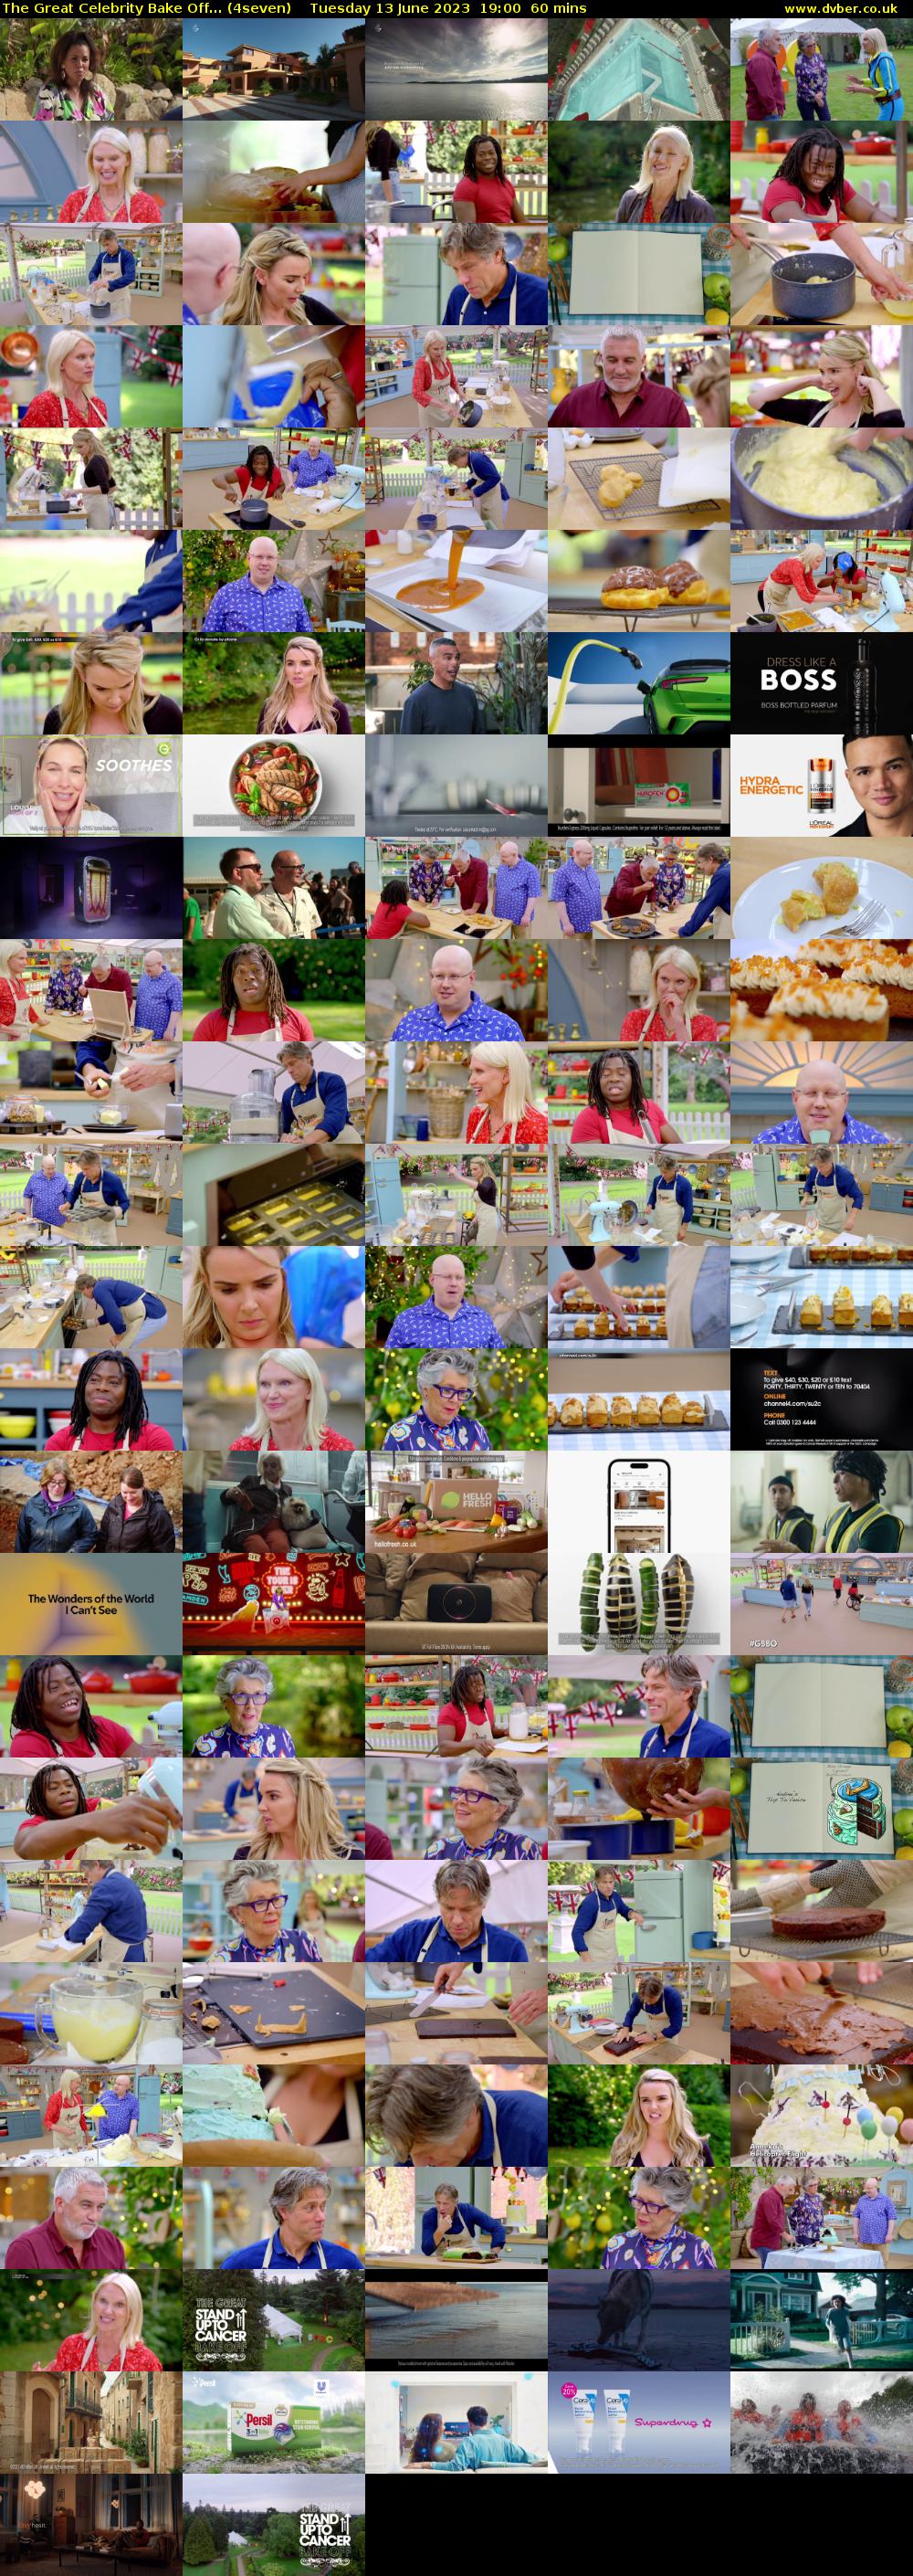 The Great Celebrity Bake Off... (4seven) Tuesday 13 June 2023 19:00 - 20:00